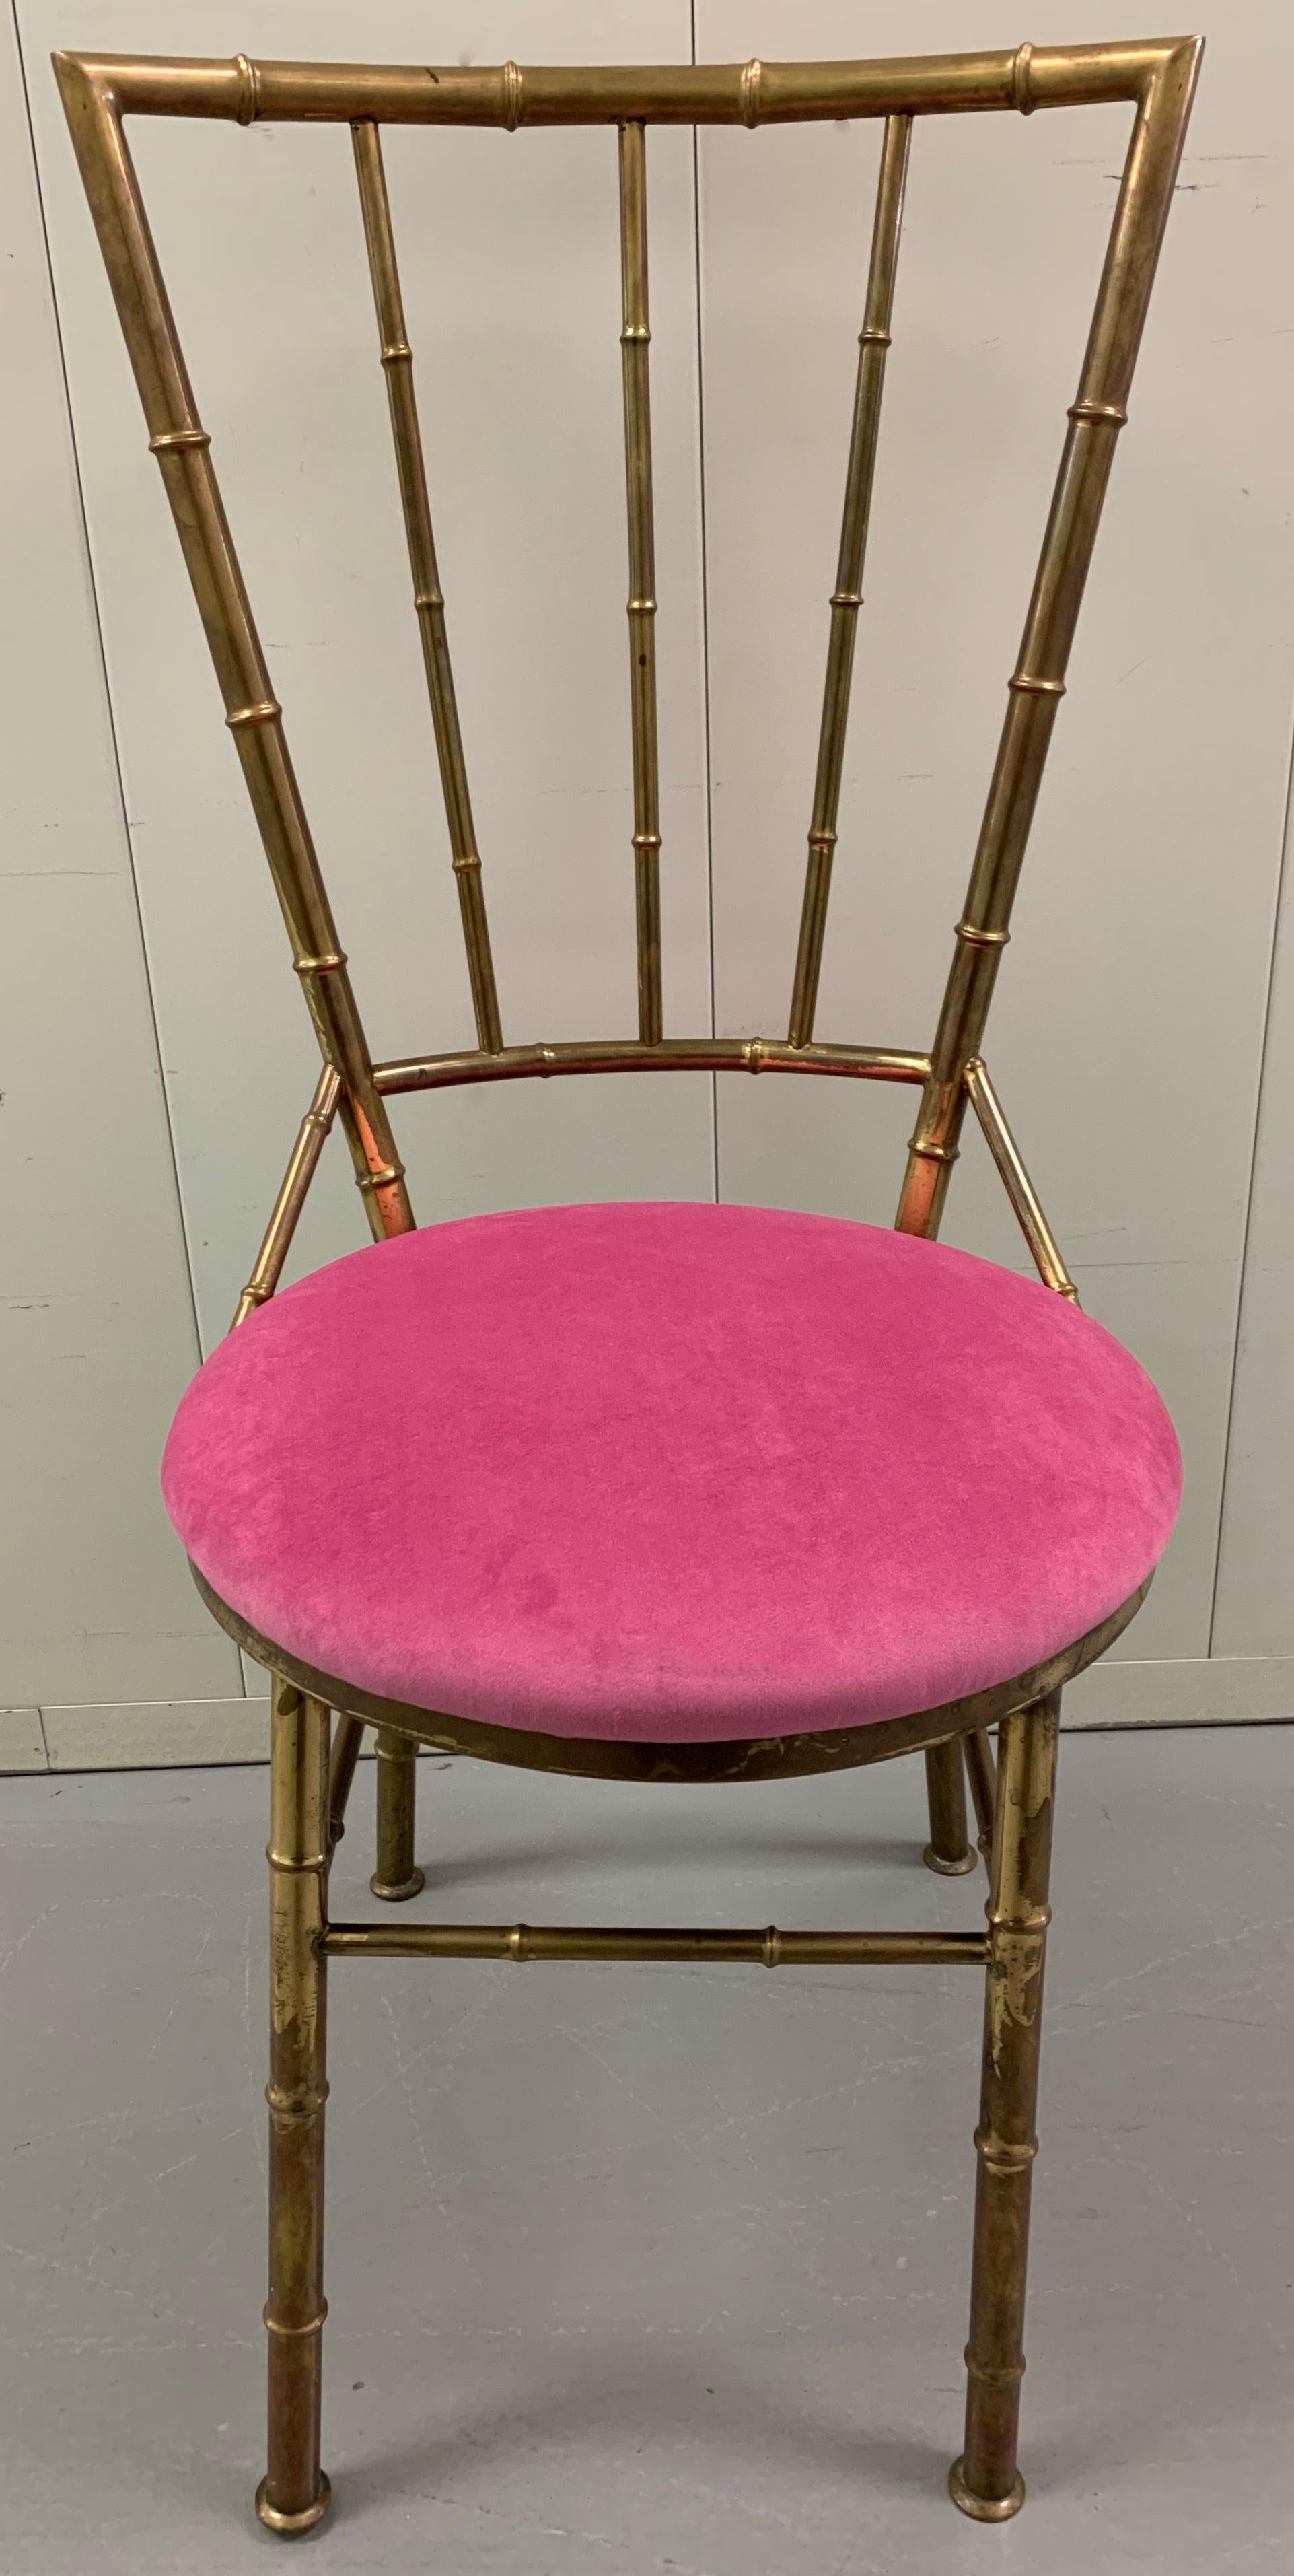 Pair of midcentury Italian brass bamboo side chairs. Newly upholstered in pink velvet fabric. Overall unpolished patina to brass. Stamped ‘Made in Italy’ on the underside.
Seat is 16